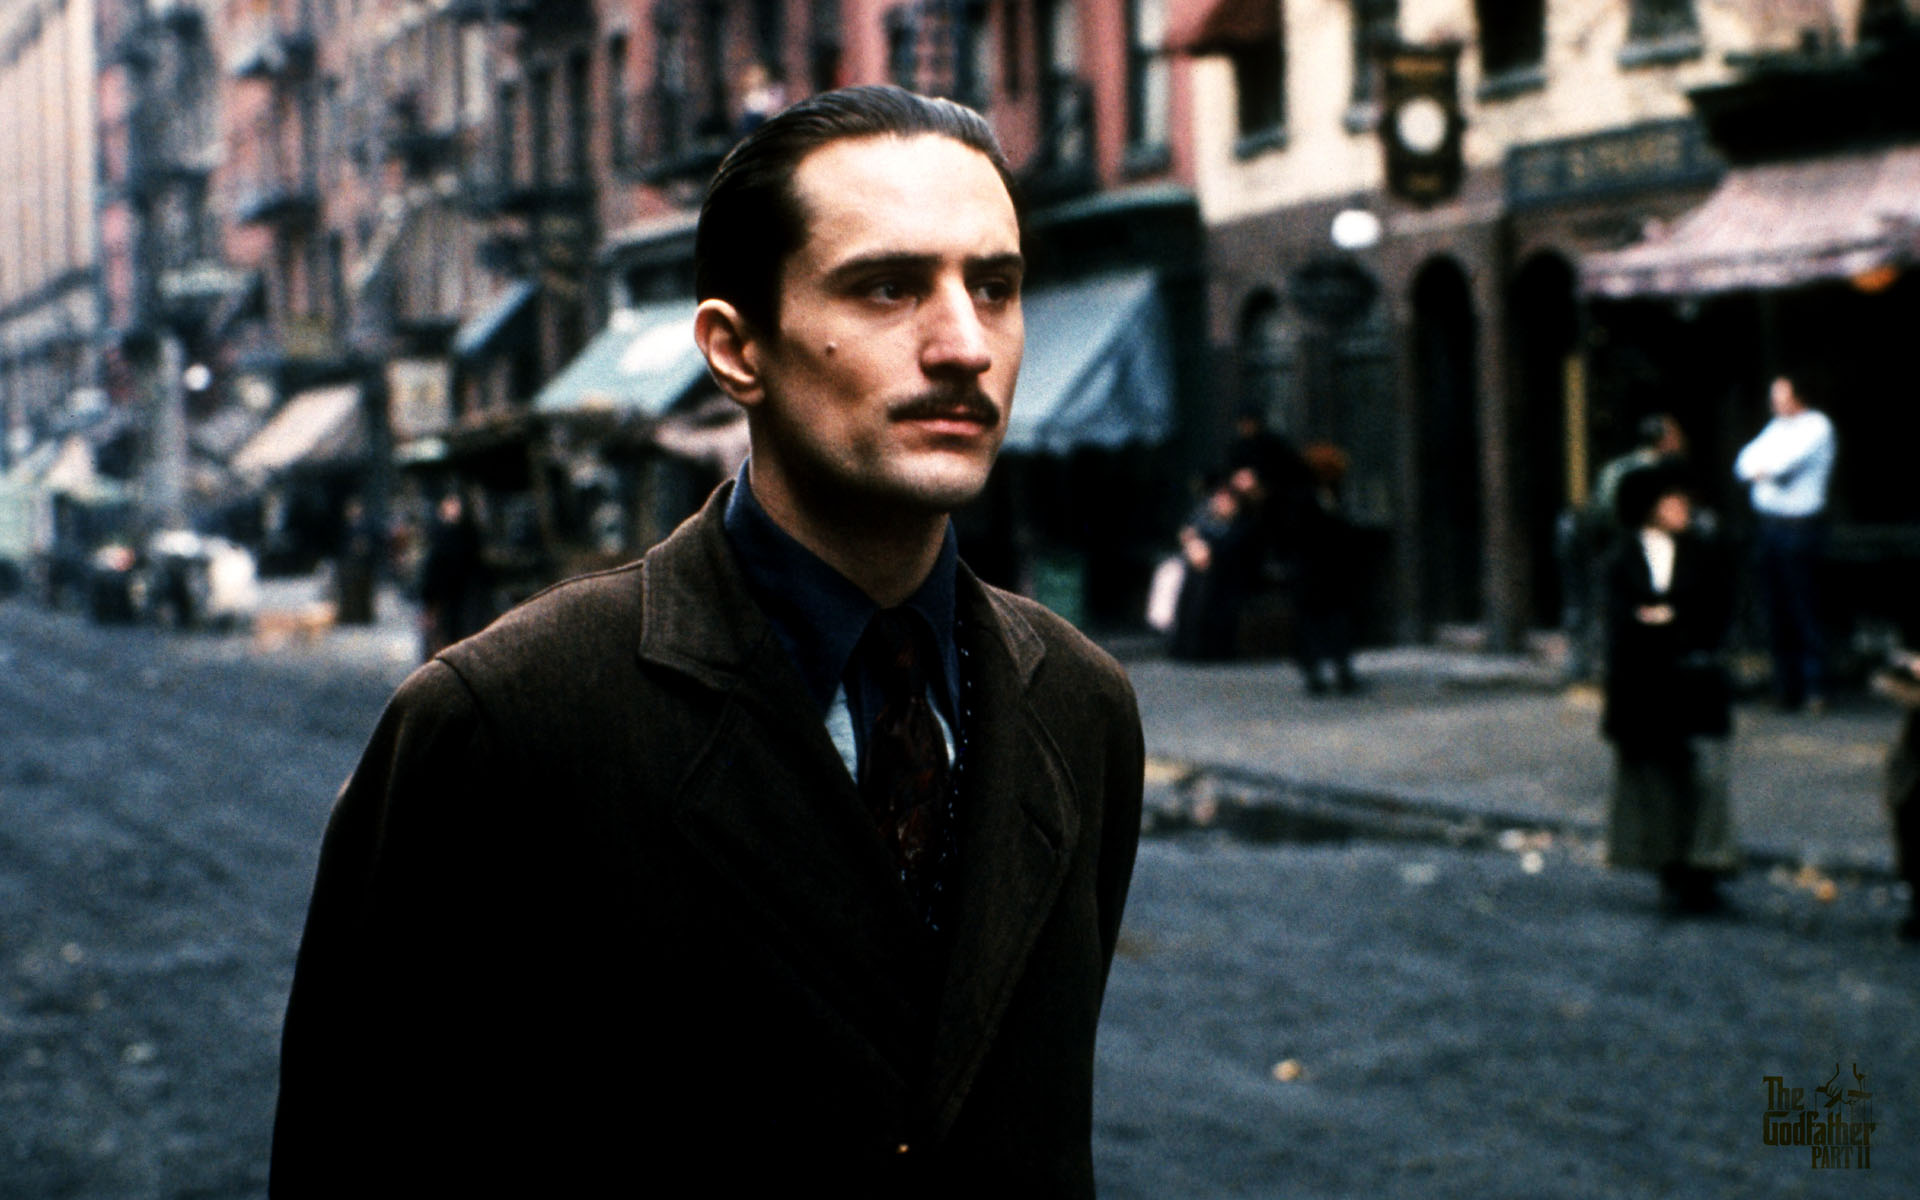 The Godfather Part II Wallpapers Just Good Vibe